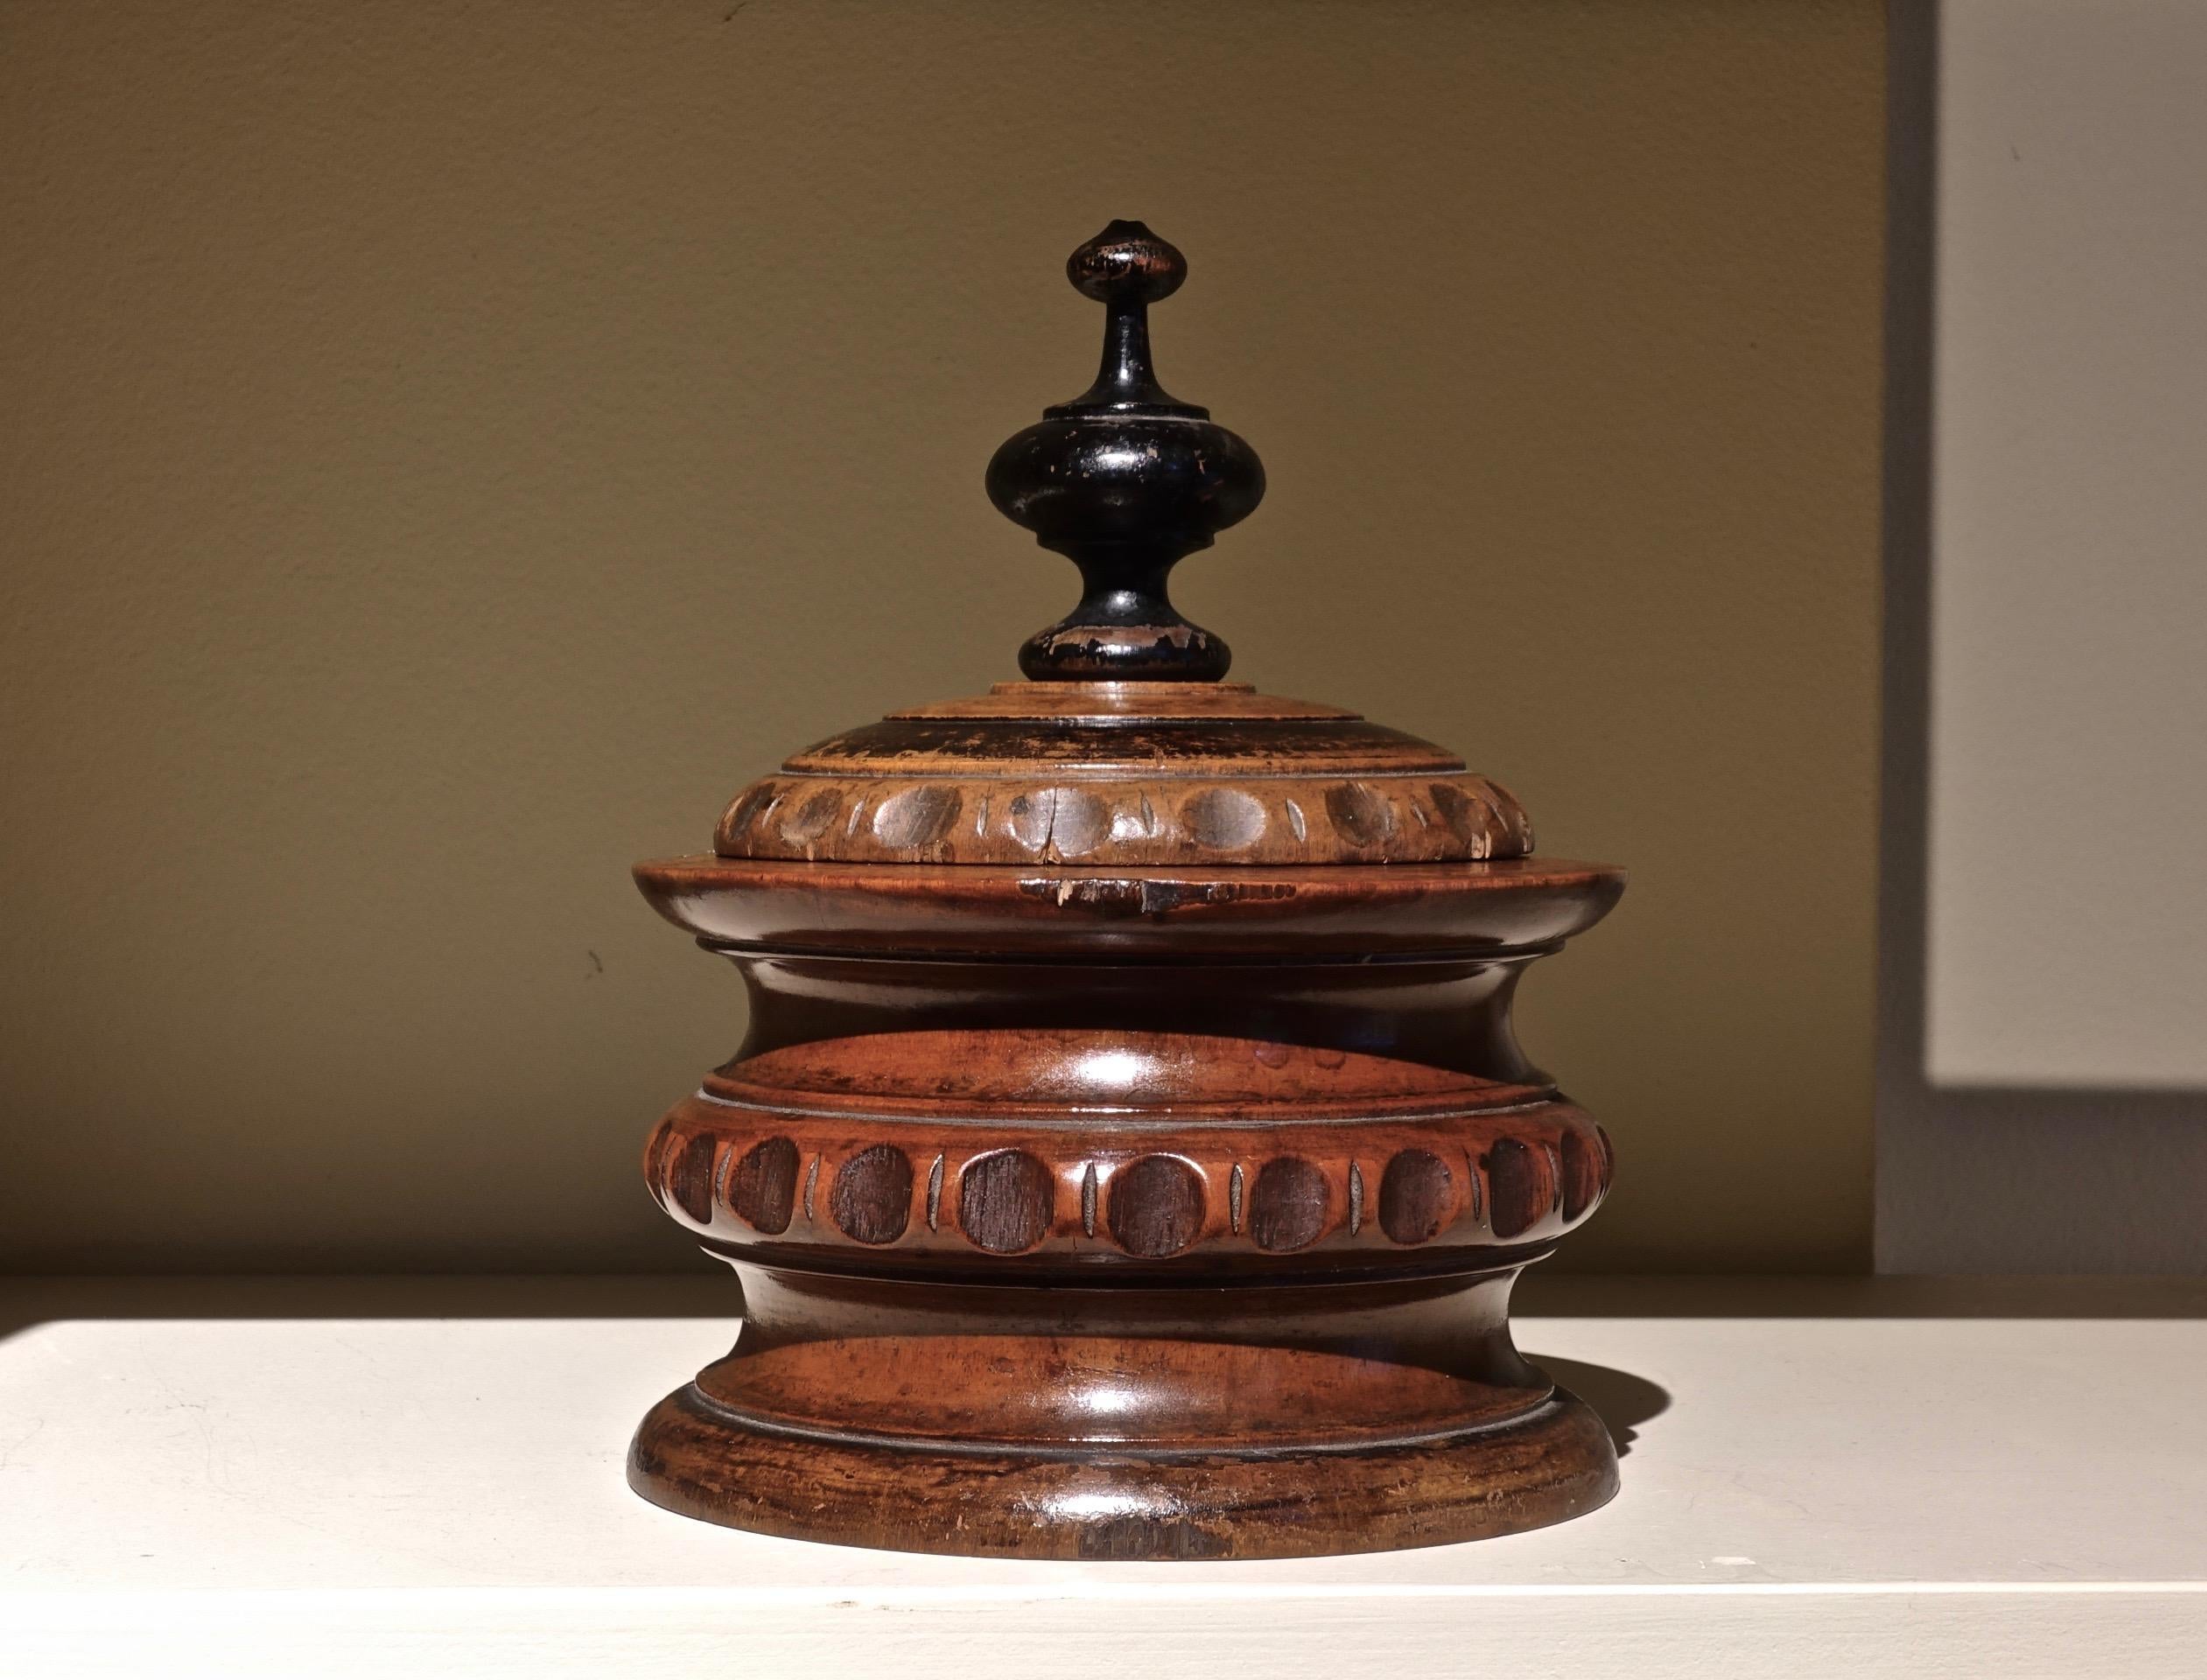 Collection of five Dutch Tobacco Jar
Netherlands, 19th century
Fruit wood, Boxwood, Mahogany and Walnut
Between 19 x 12,5 and 22 x 16,5 cm

A collection of five fine Georgian Dutch Tobacco Jar. Made from Fruit wood, Boxwood, Mahogany and Walnut,